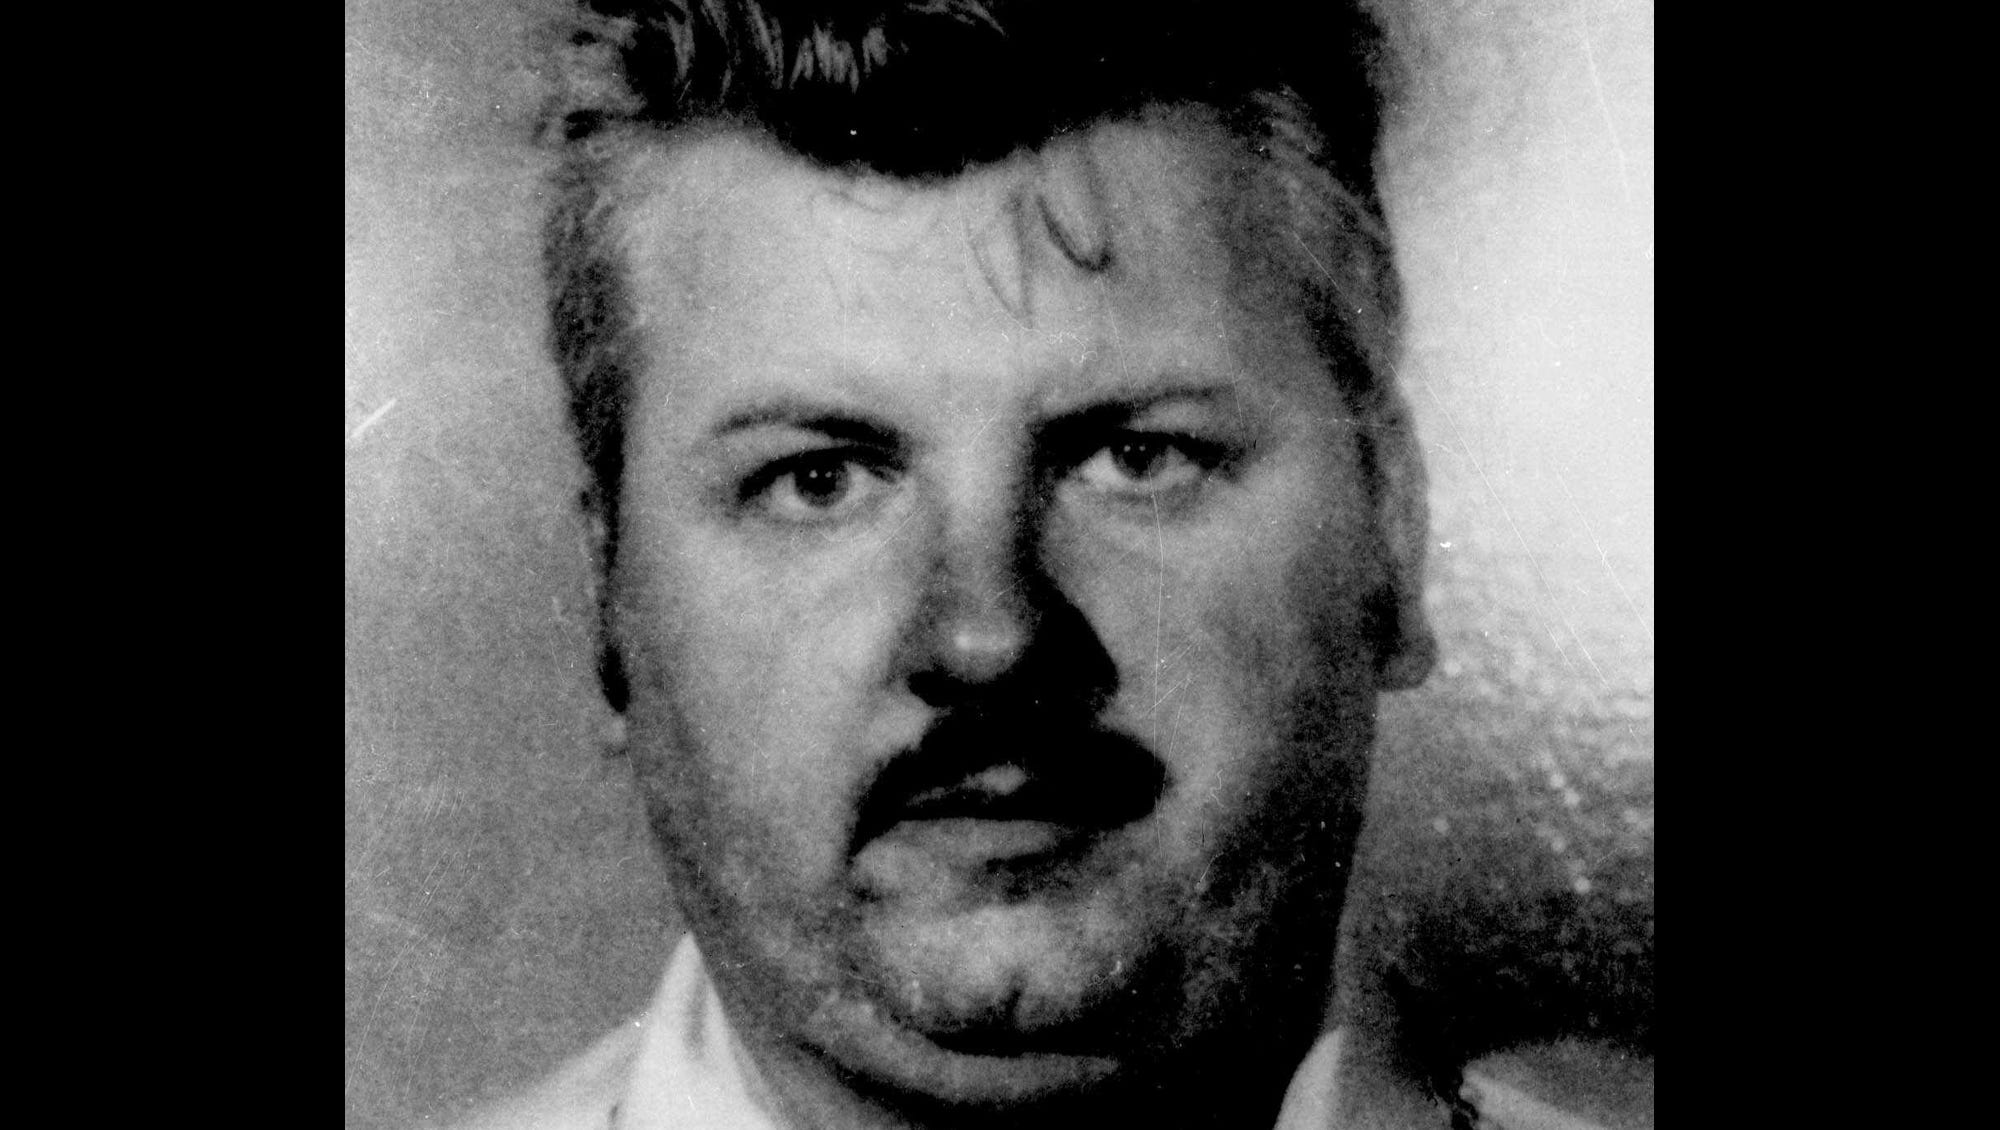 John Wayne Gacy: Devil in Disguise doc will premiere on Peacock